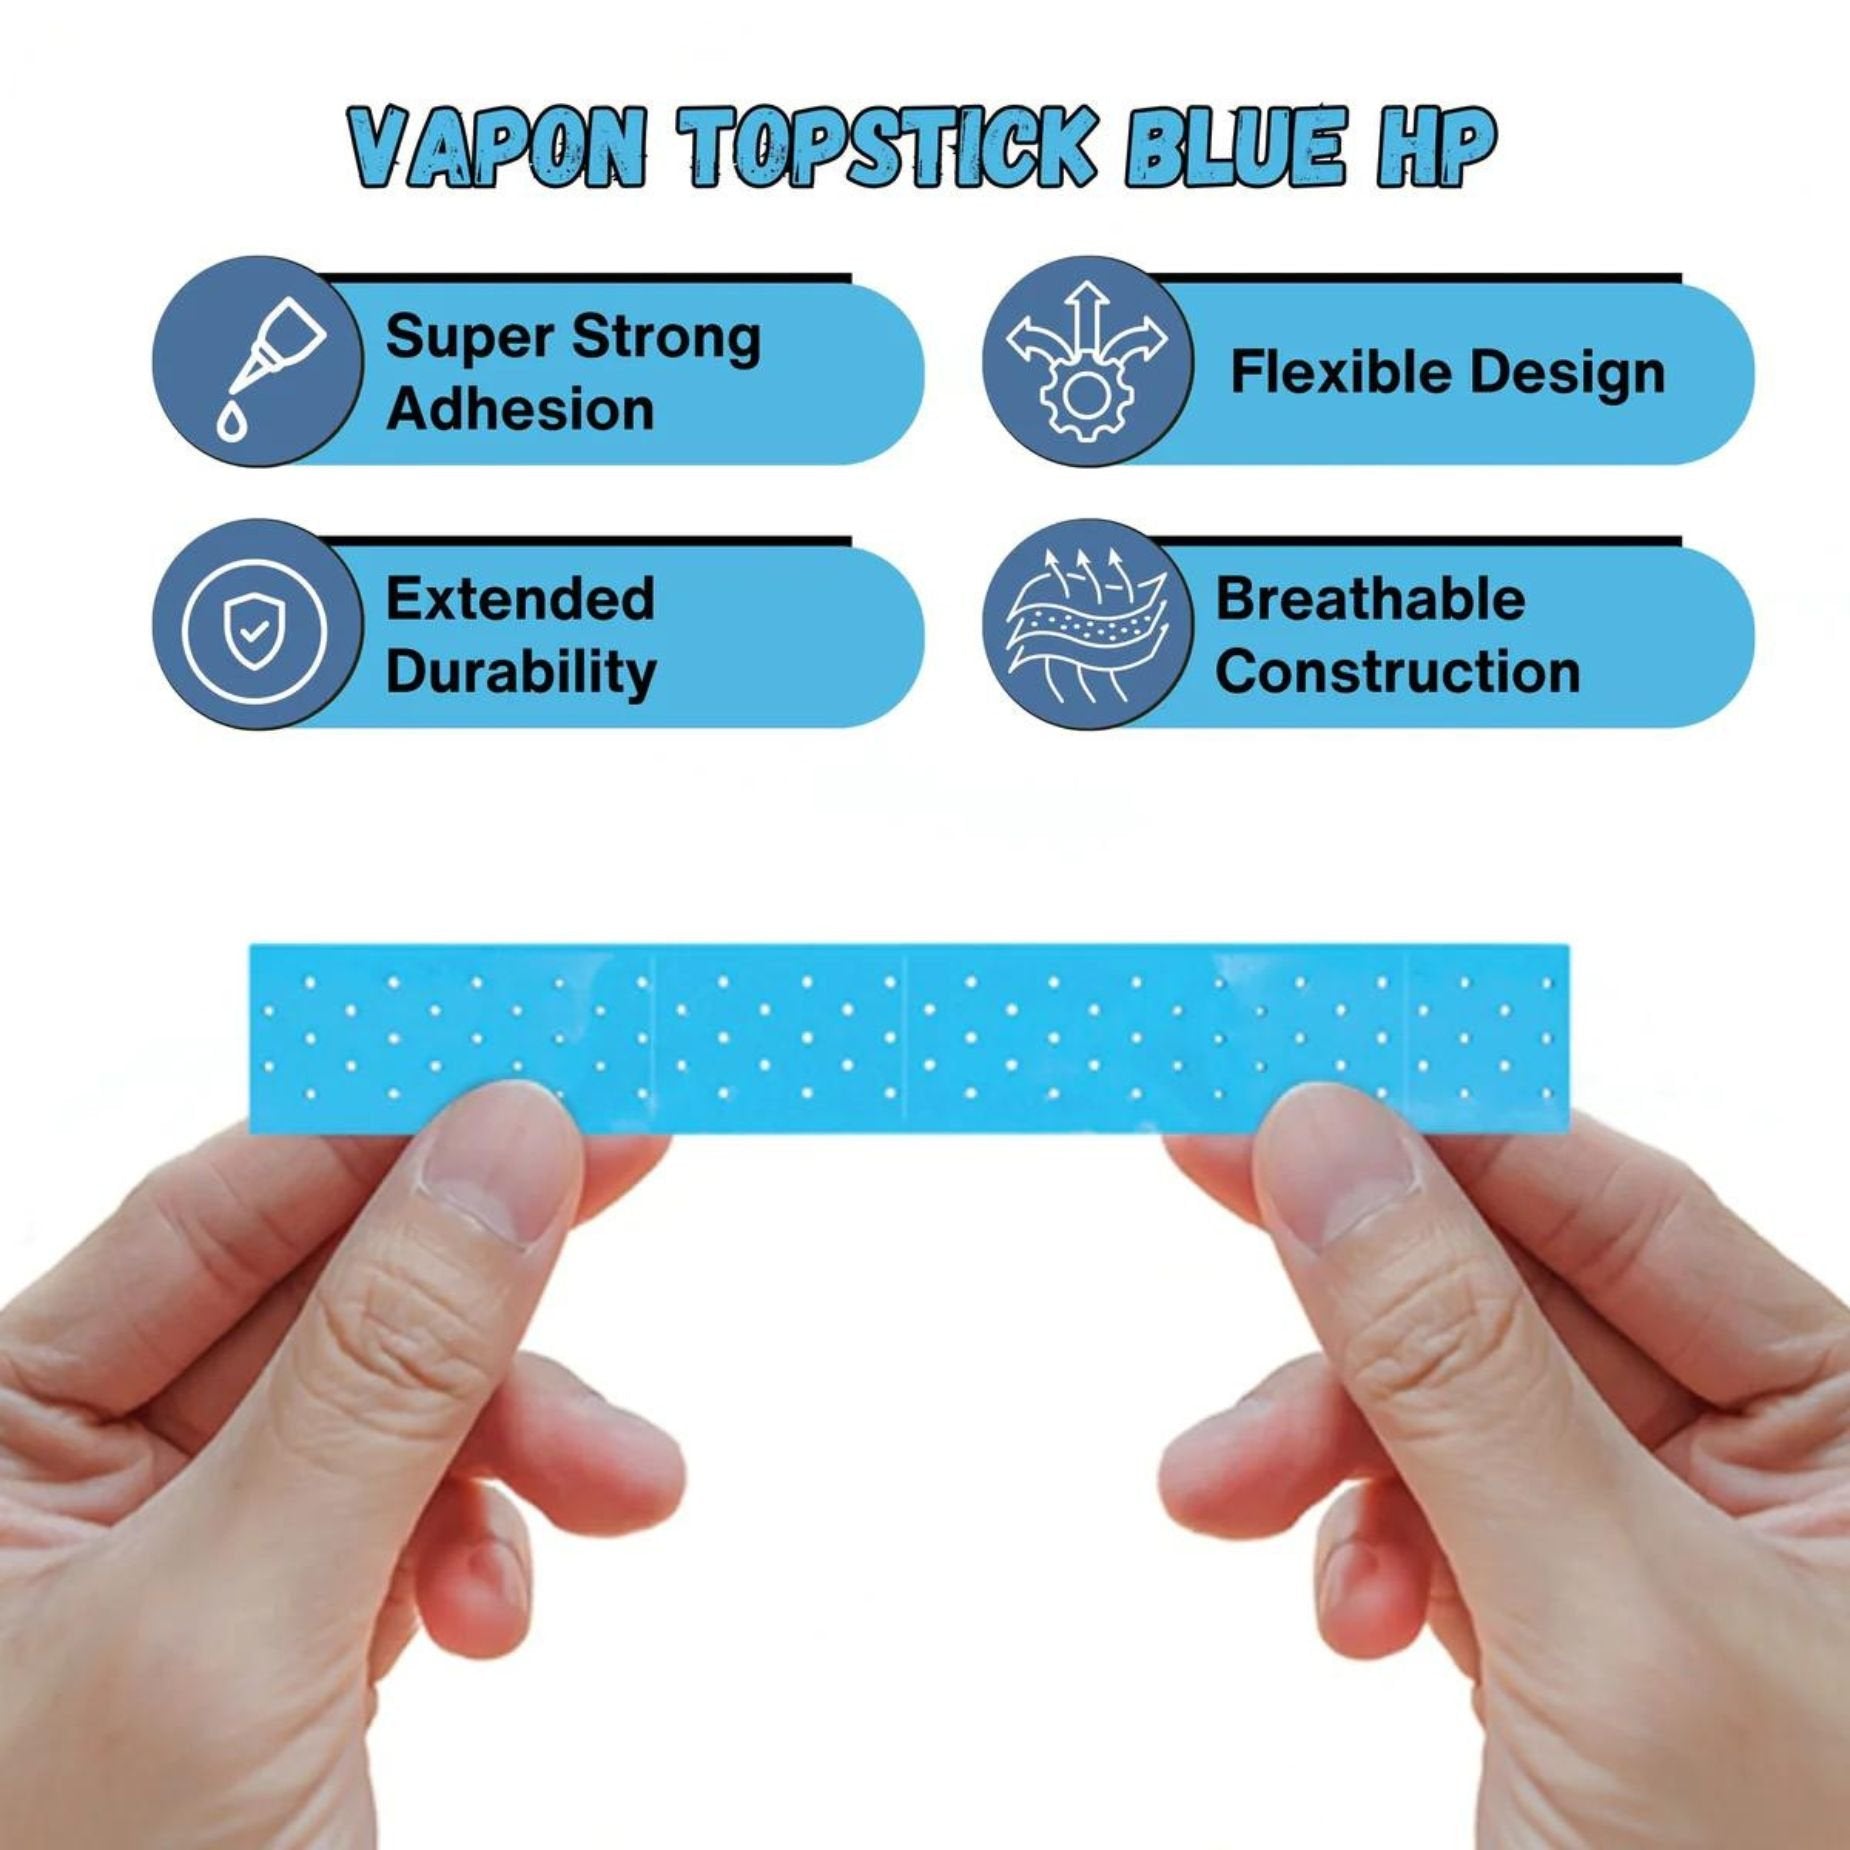 Vapon Topstick Blue HP - Double Sided Tape for Lace Wigs, Toupees, and Hair Extensions- 100 Sheets